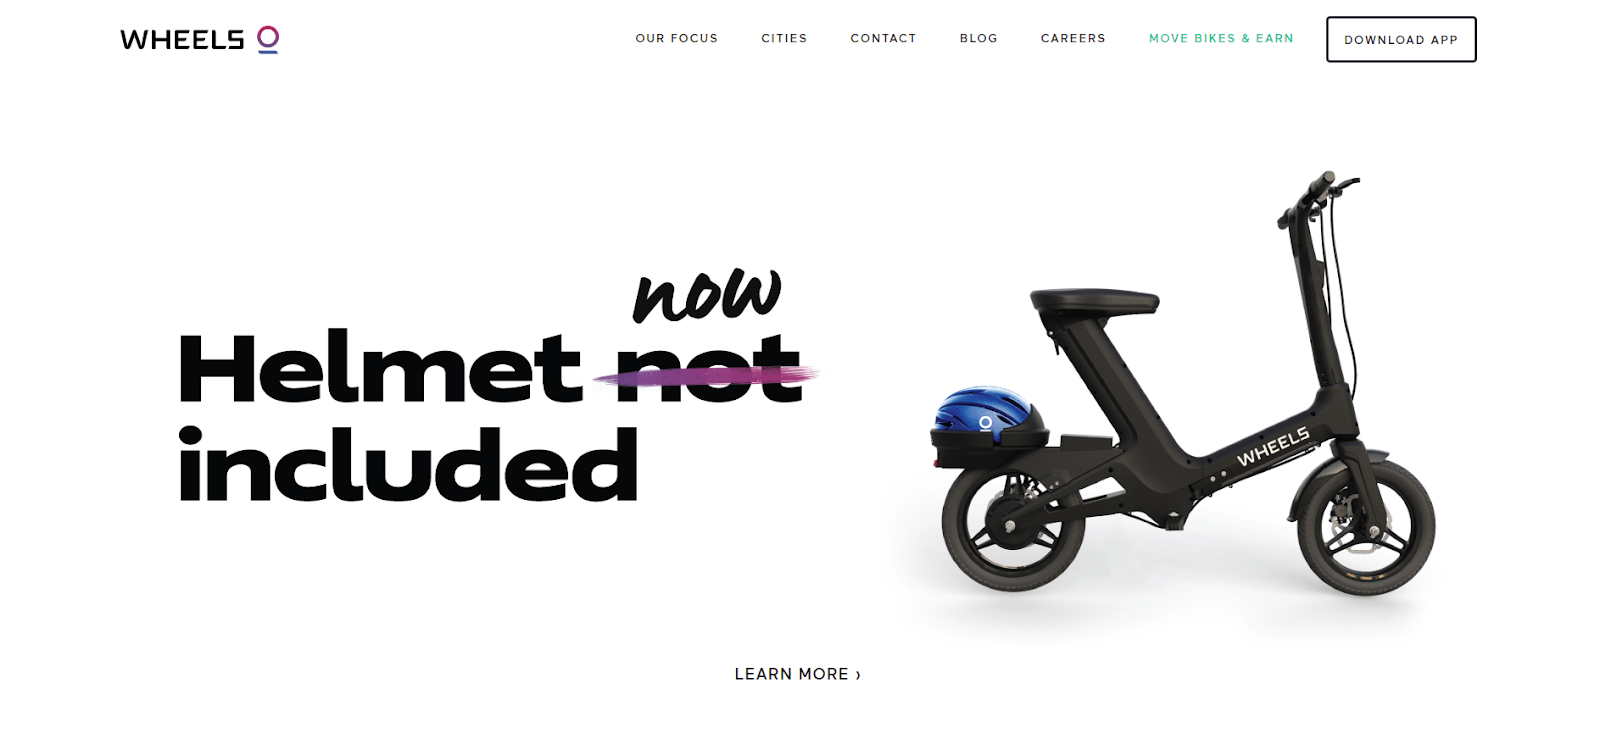 The Wheels Scooter homepage